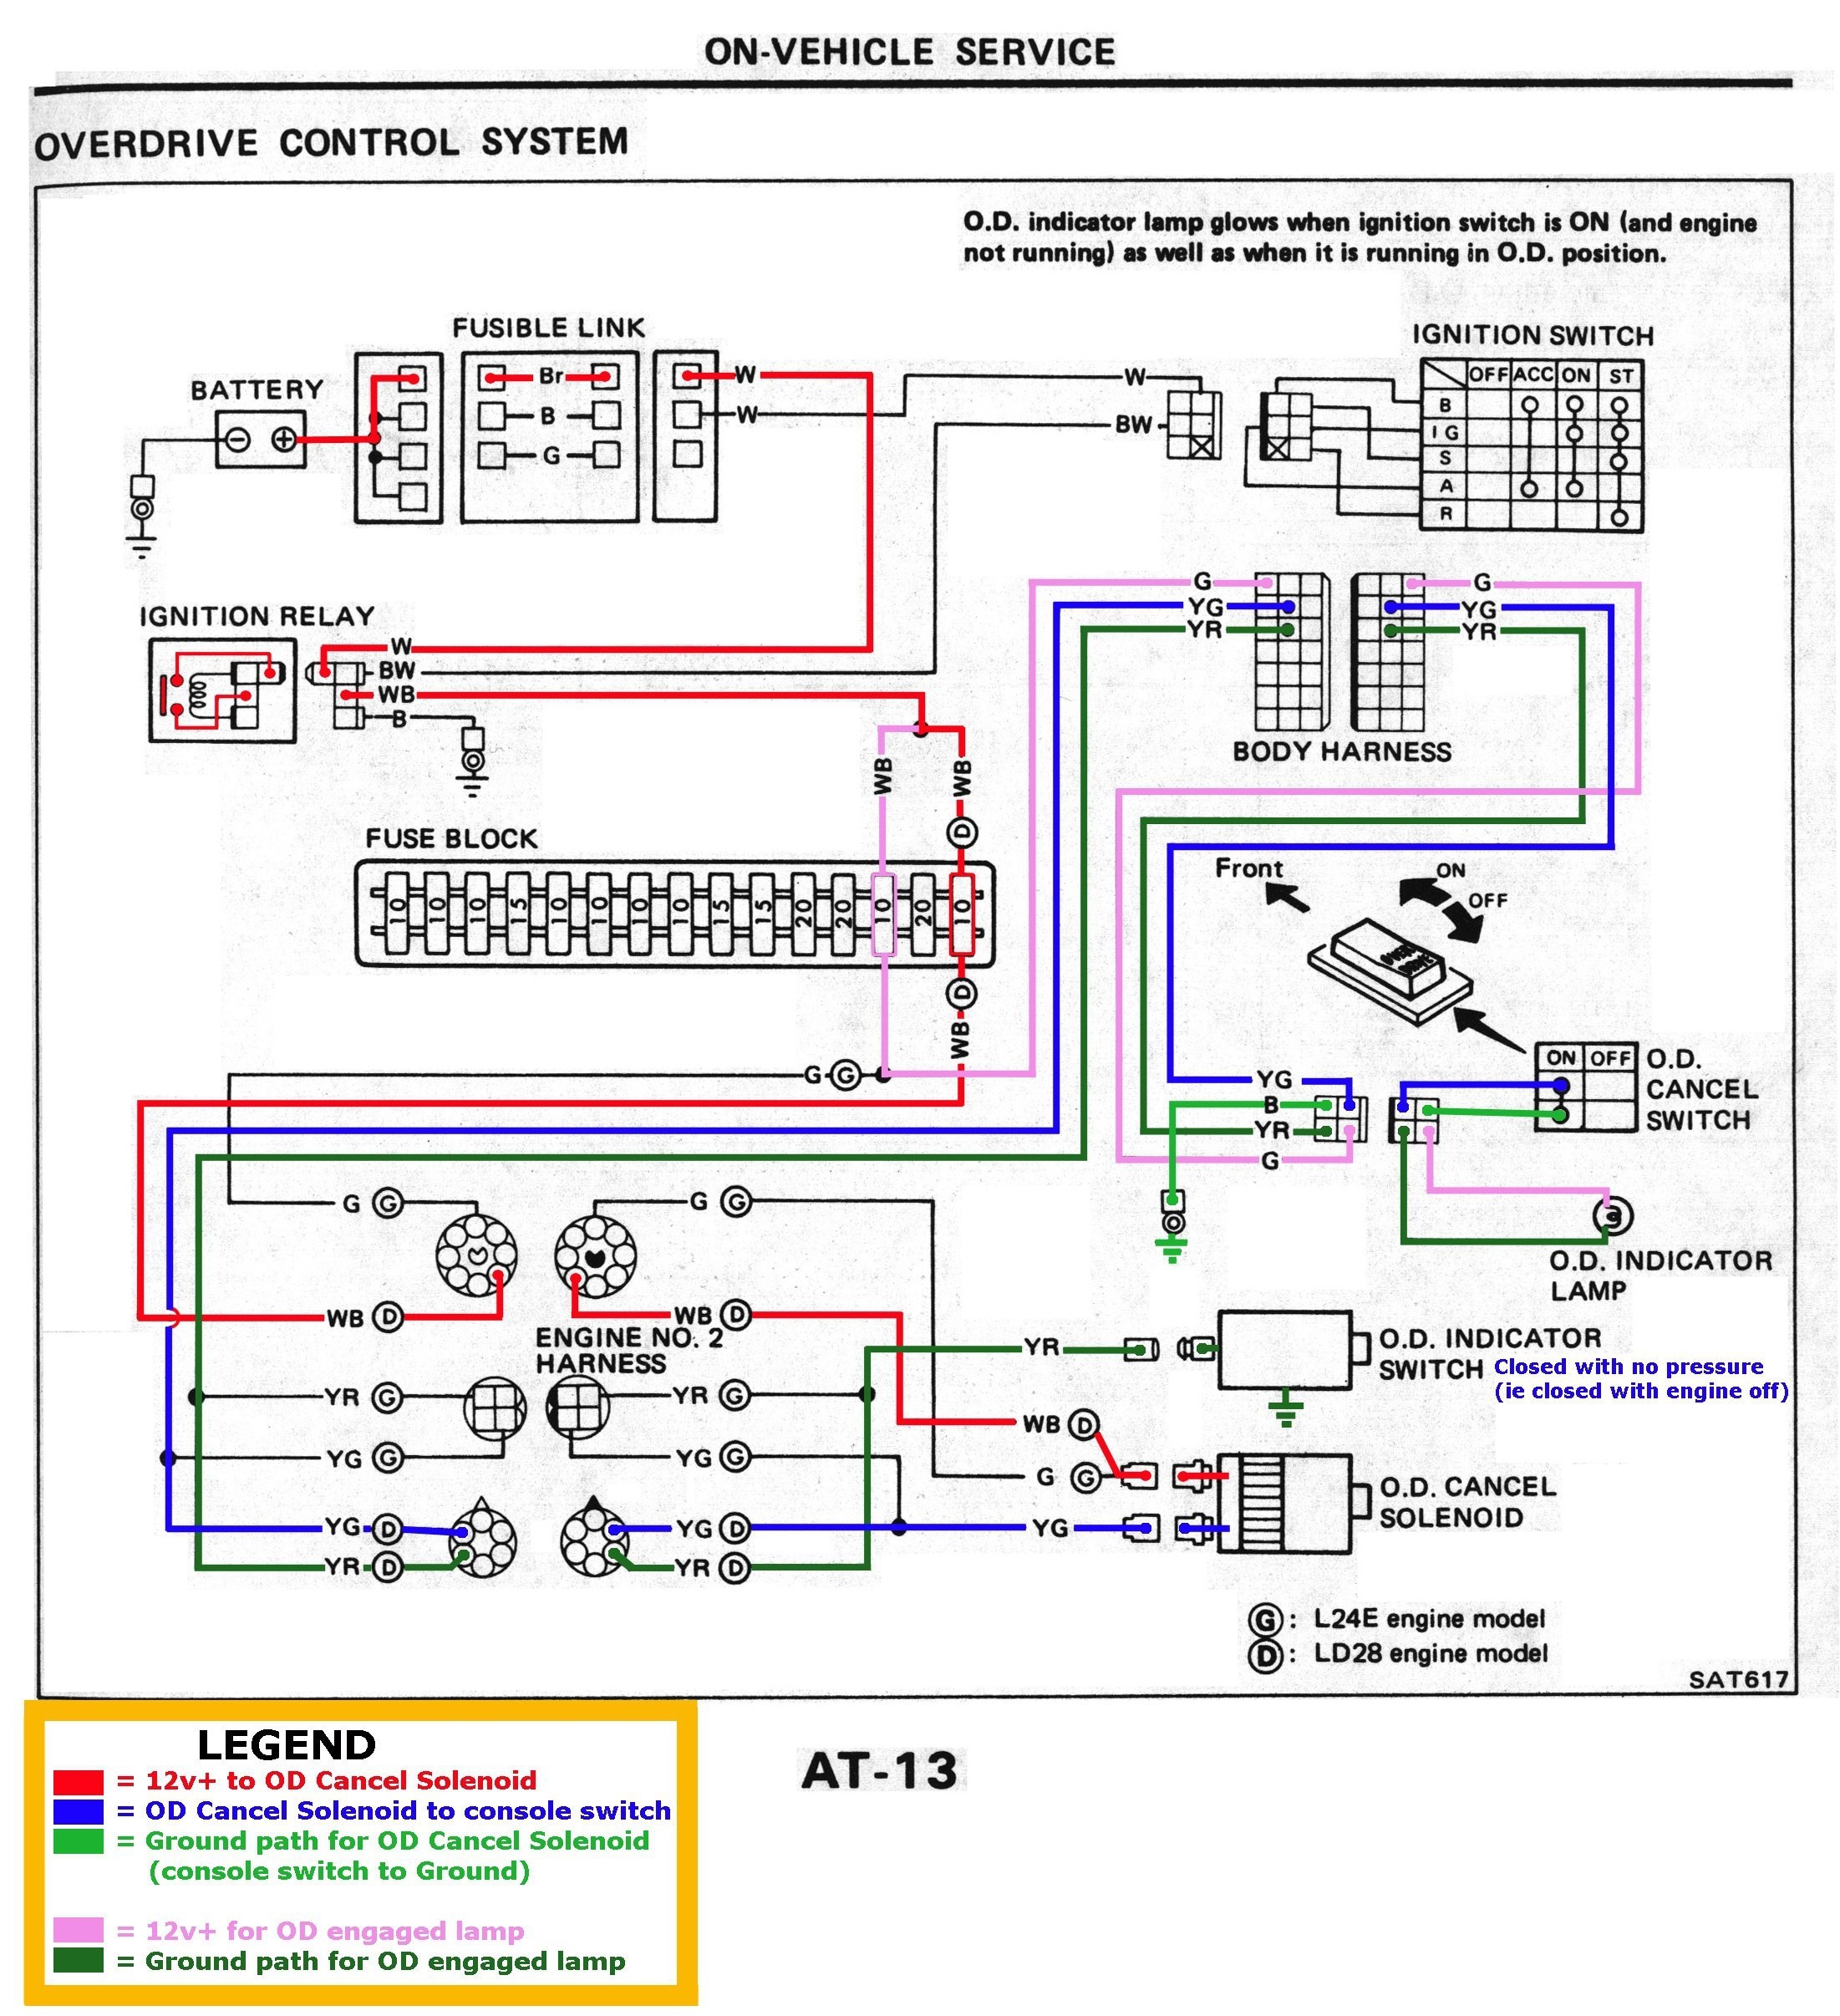 Wiring Diagram for Light Switch and Outlet New Wiring A Light Switch and Outlet to Her